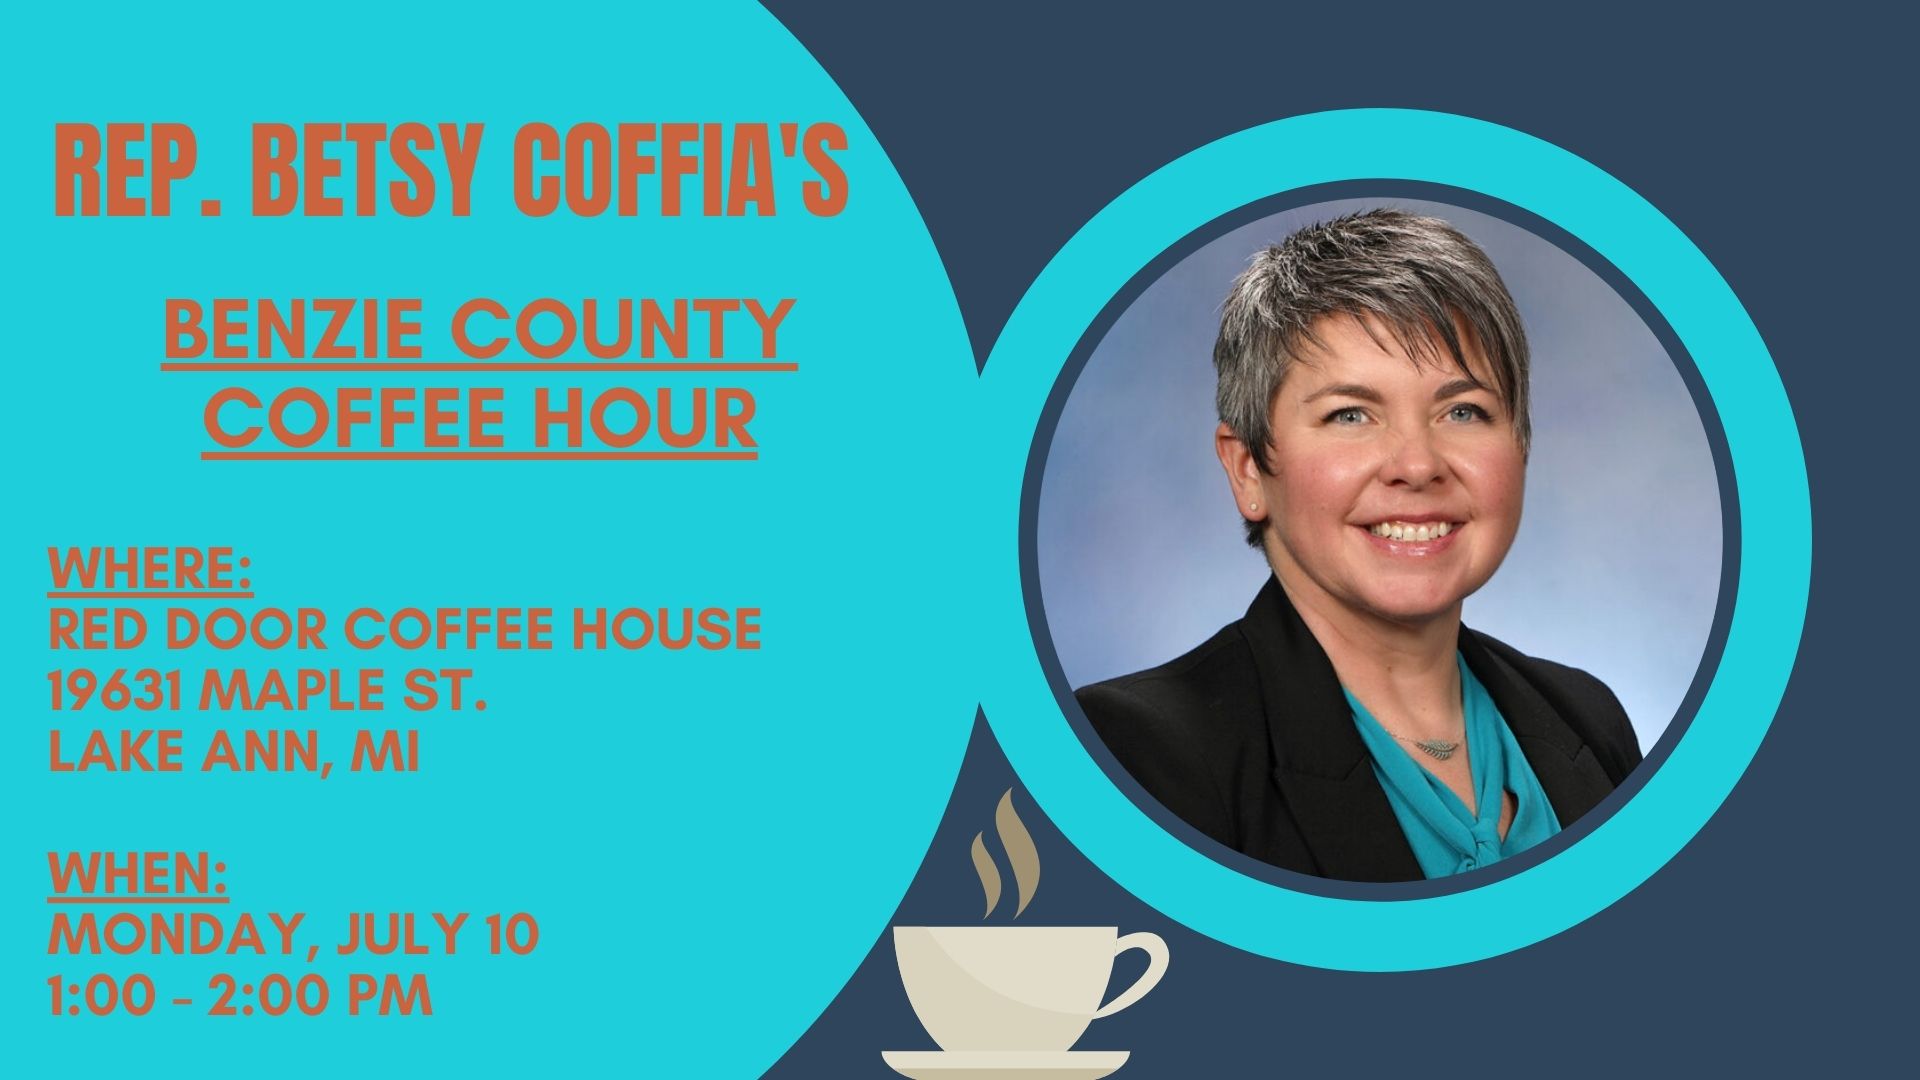 Rep. Coffia's July Benzi Coffee Hour image with text: